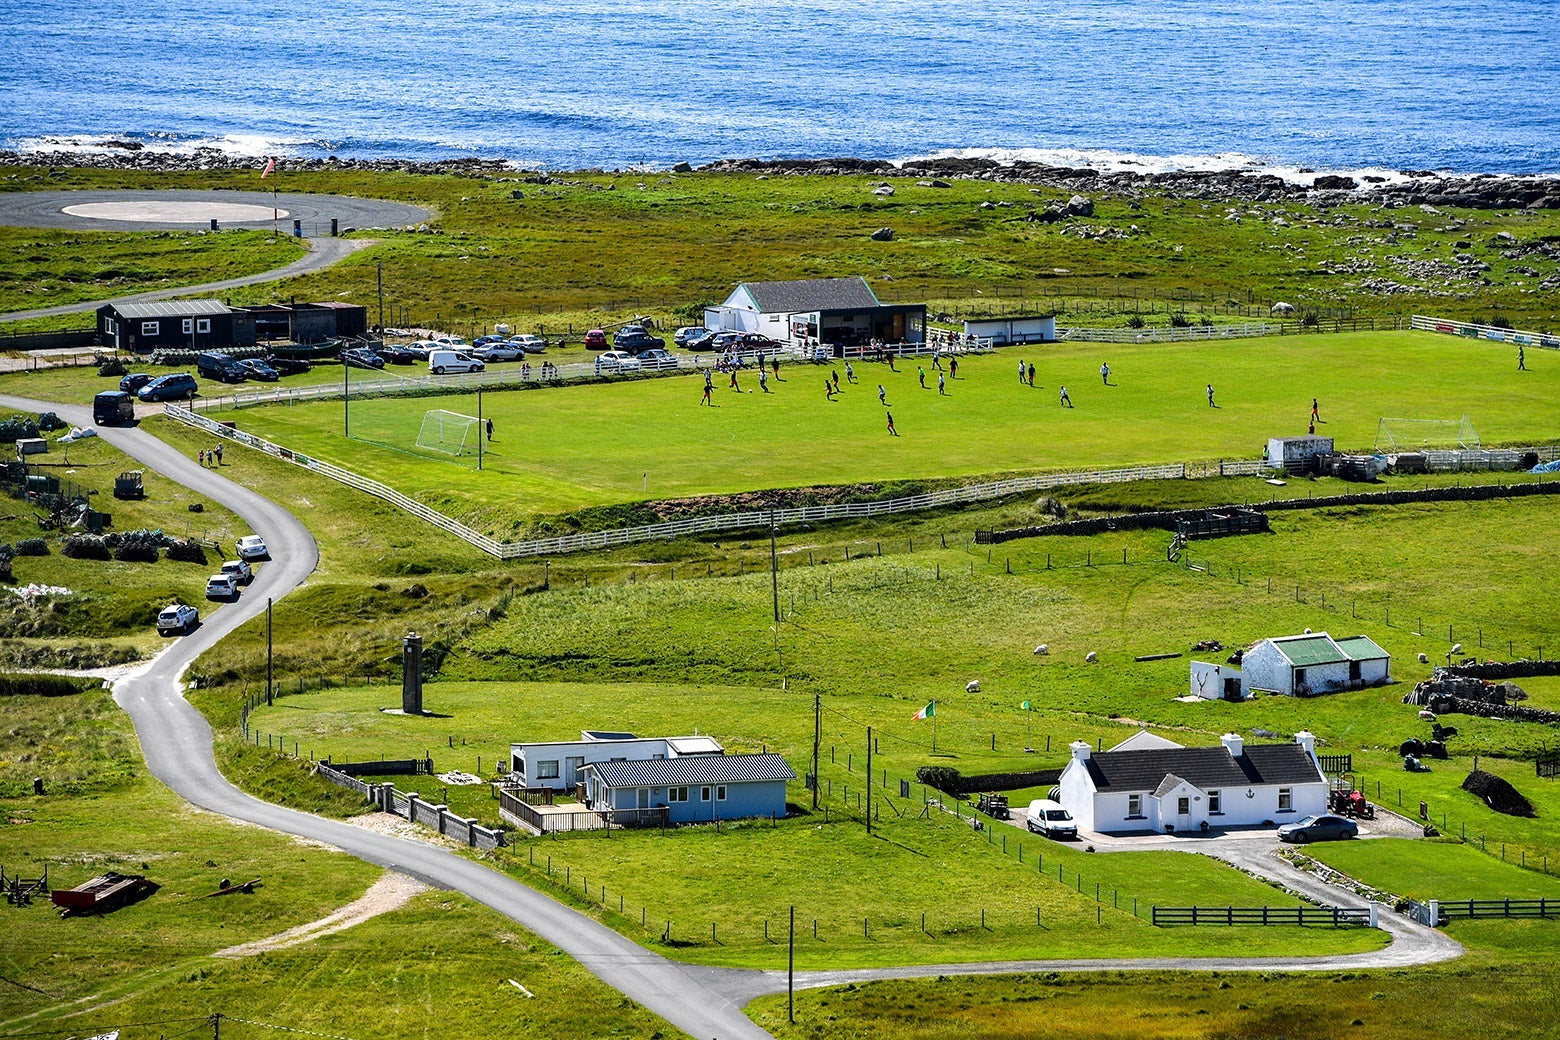 An aerial view of the lush greenery of the island of Arranmore